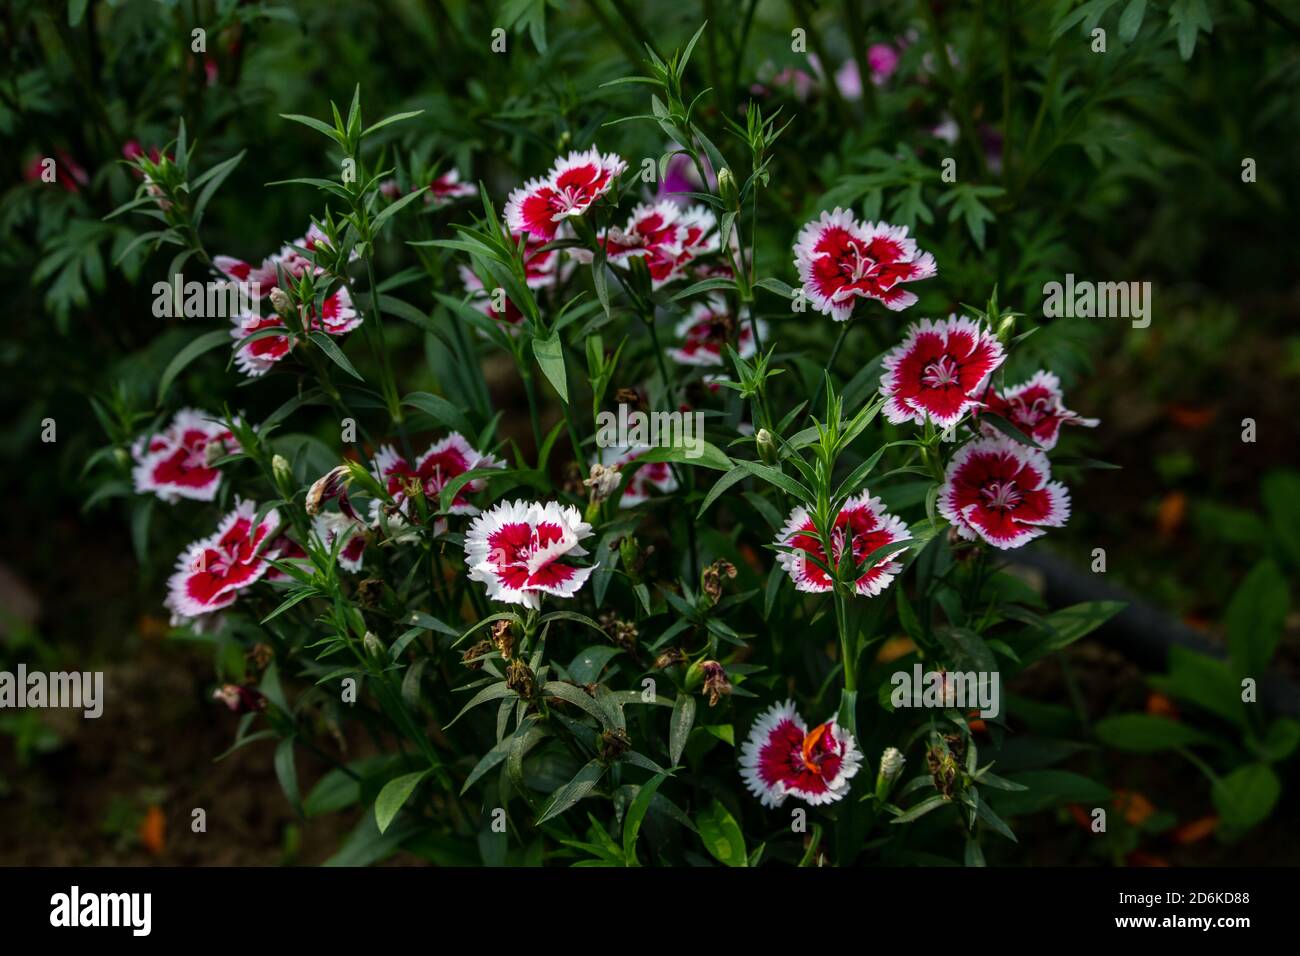 White and red Dianthus Chinensis or China Pink flowers. White cycle made the flowers more attractive. Stock Photo